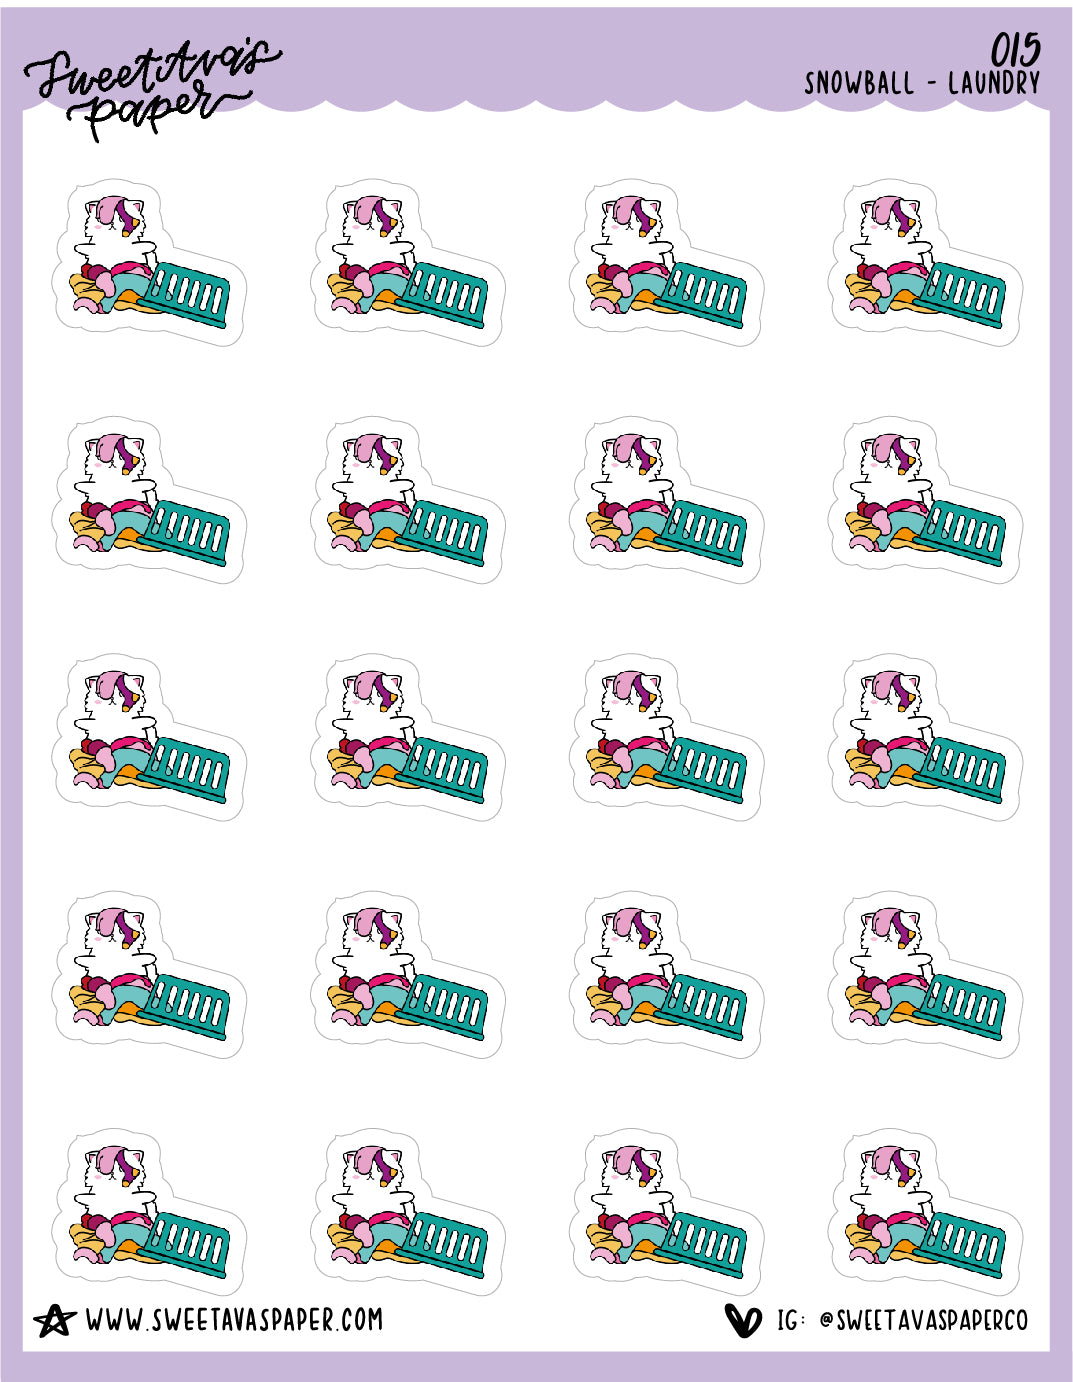 Laundry Basket Stickers - Snowball The Cat - [015]